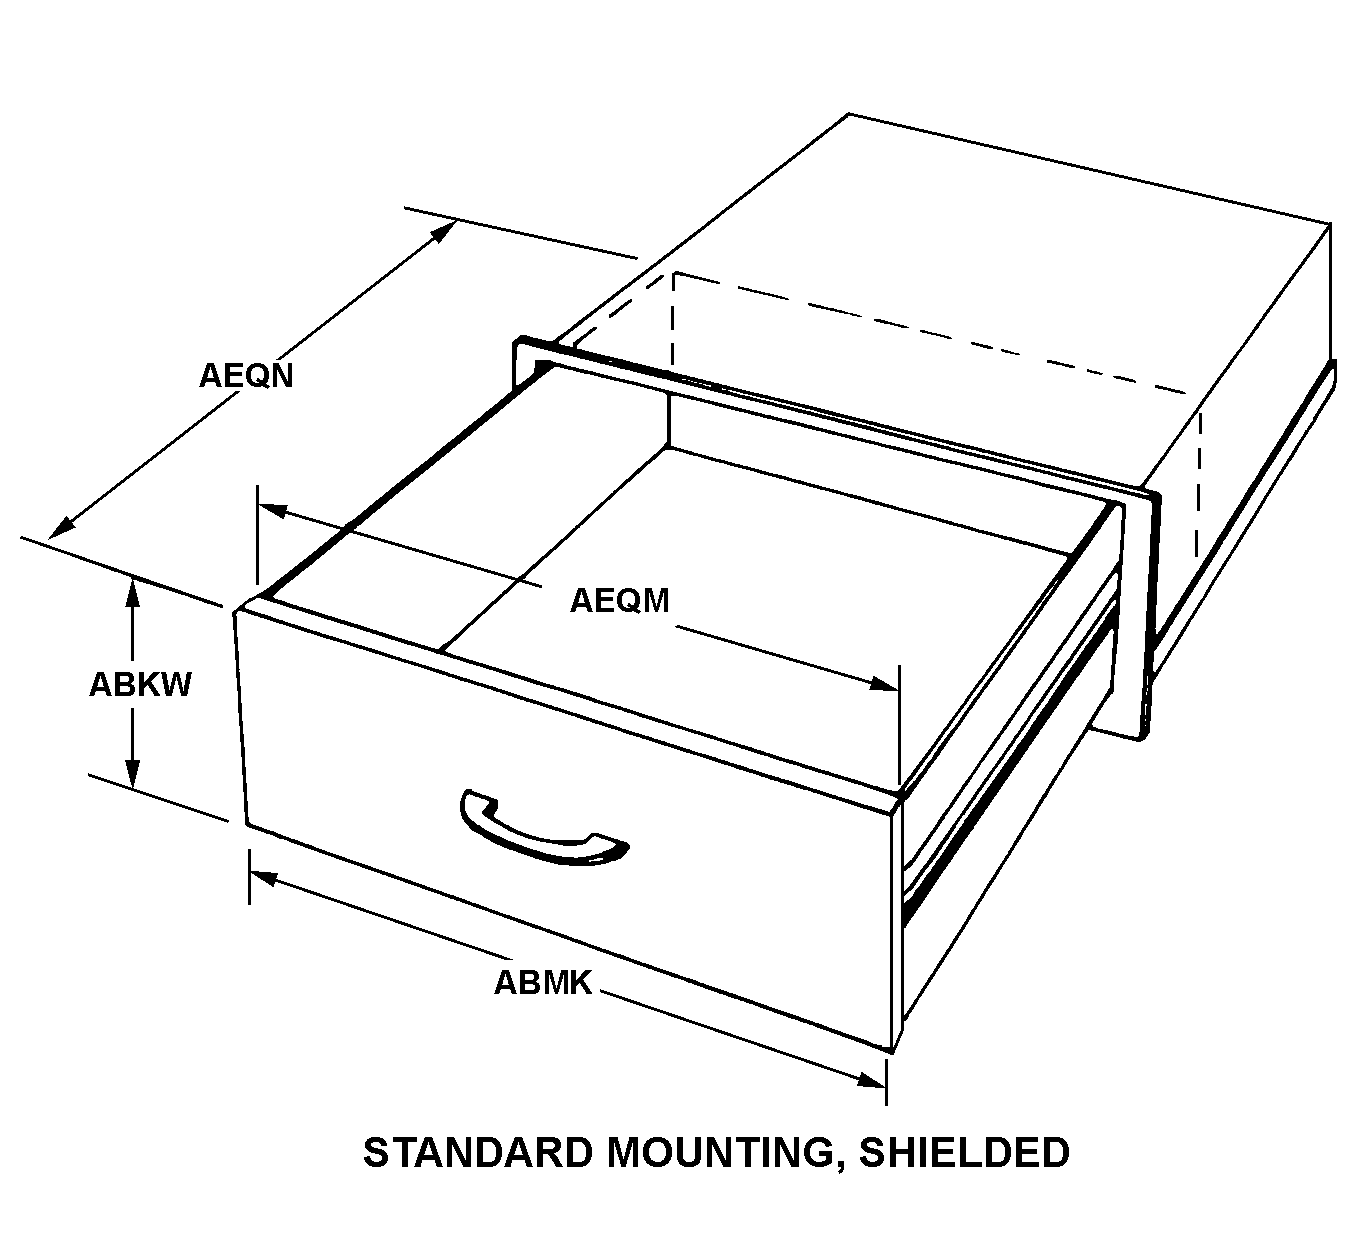 STANDARD MOUNTING, SHIELDED style nsn 5975-01-576-4944